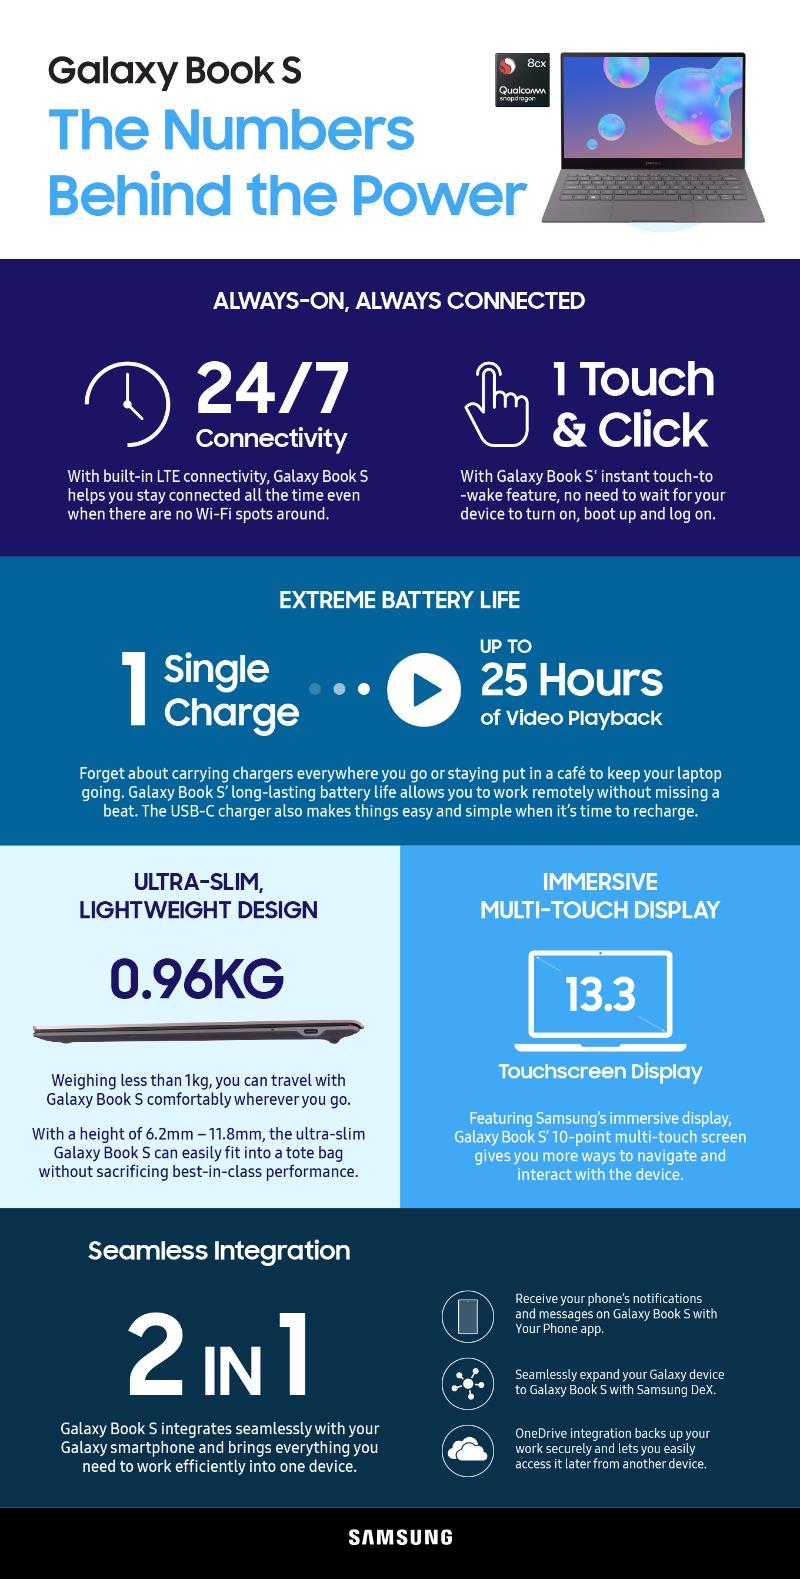 Galaxy-Book-S-in-numbers_infographic-3.jpg